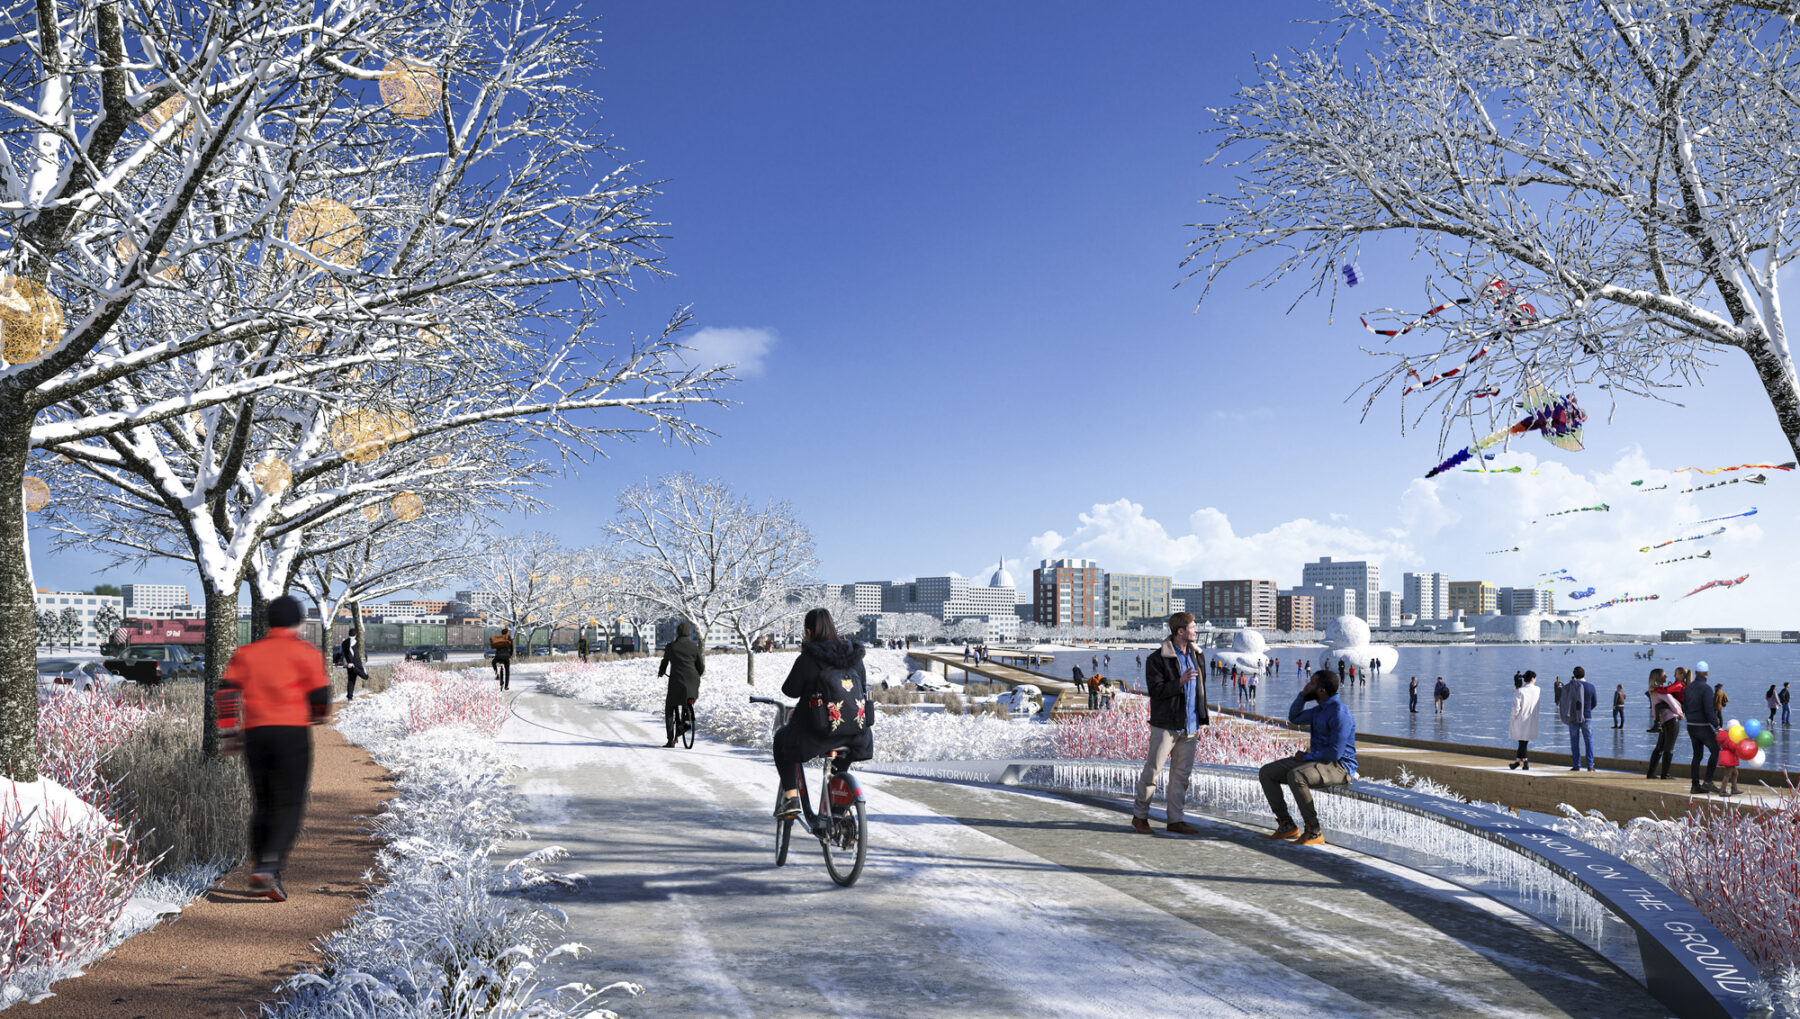 rendering of pedestrians and cyclists enjoying the accessible paths along the riverfront park